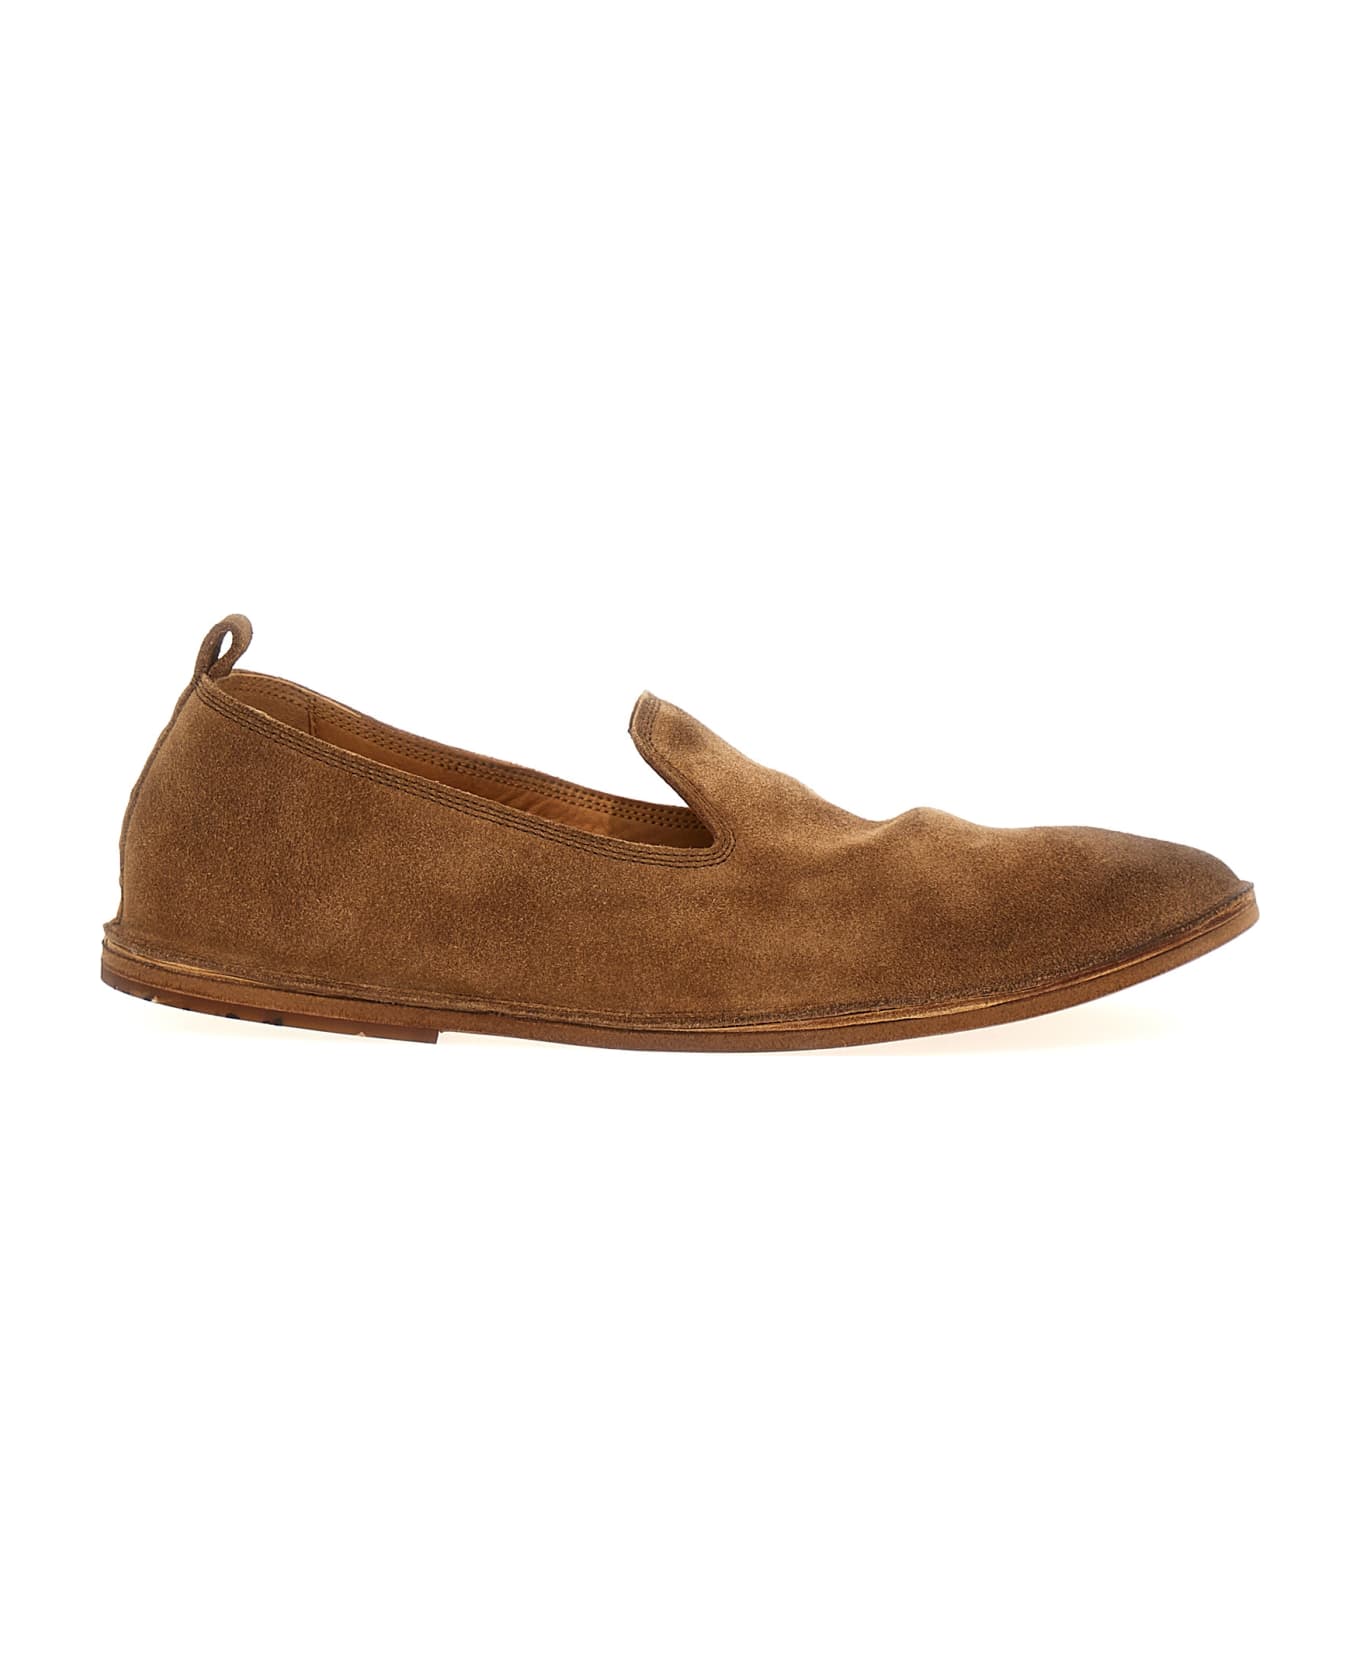 Marsell 'strasacco' Loafers - Beige